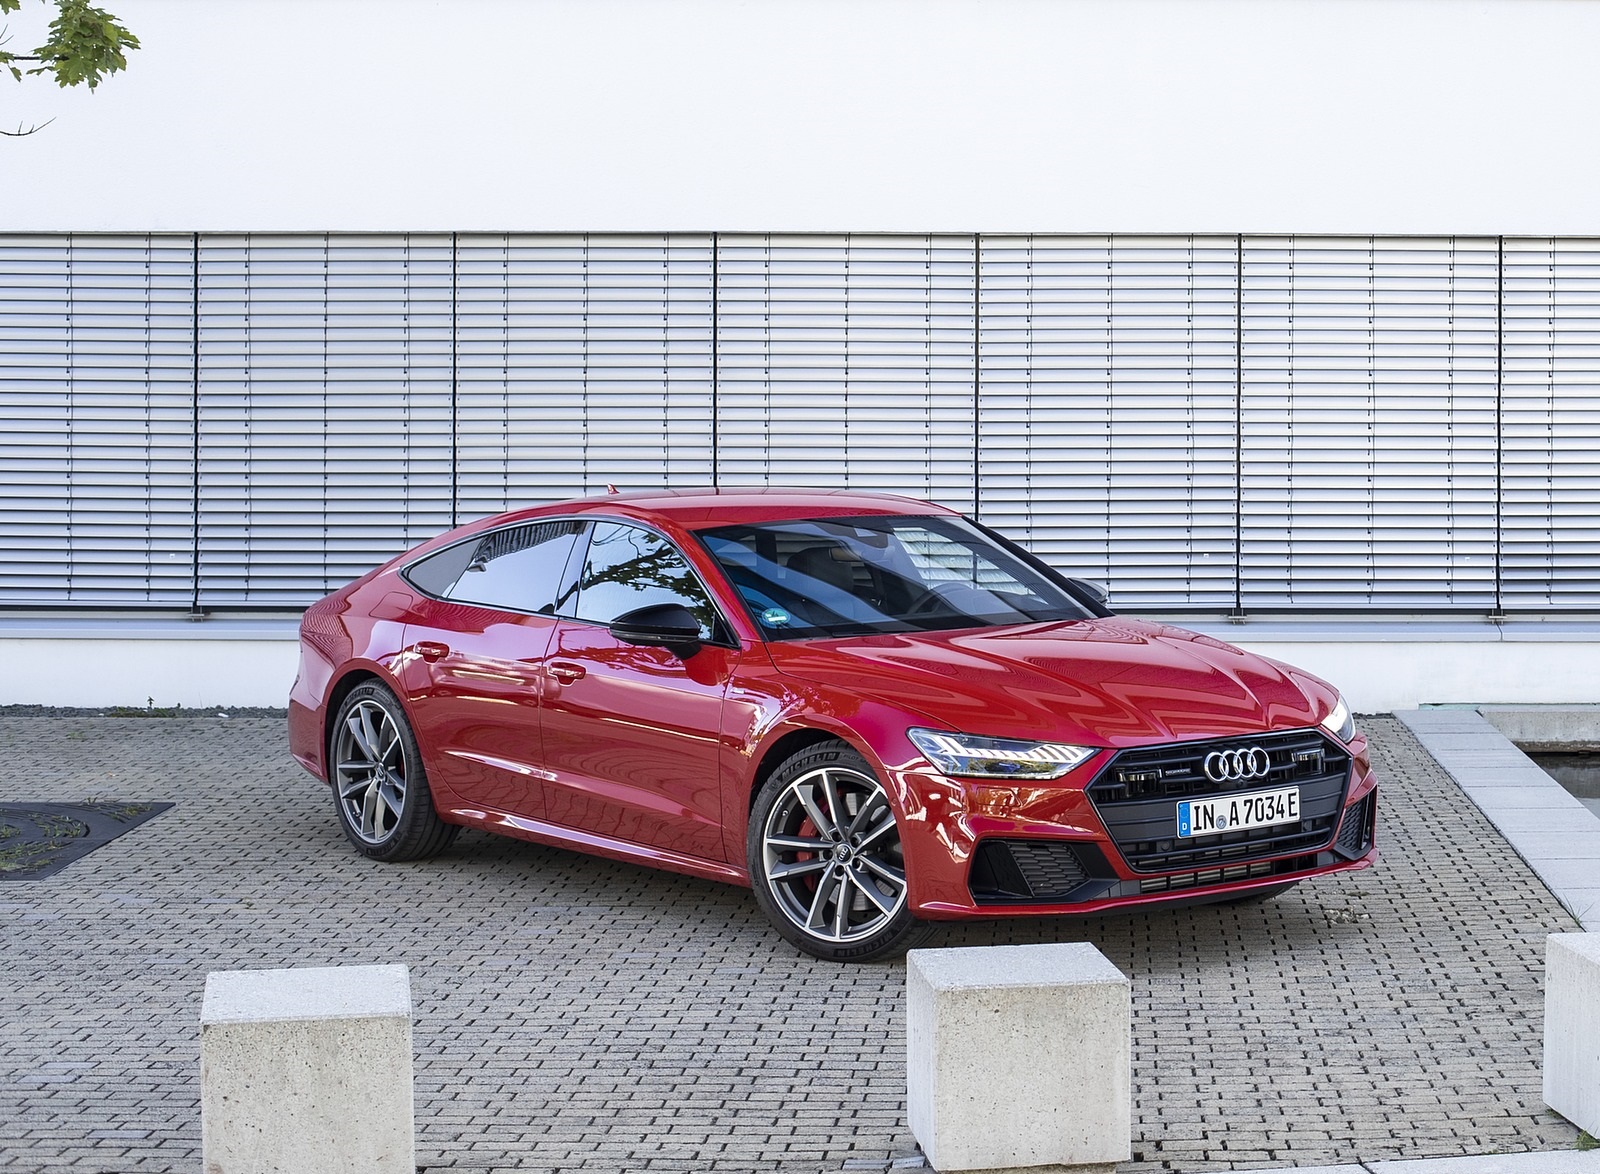 2020 Audi A7 Sportback 55 TFSI e quattro Plug-In Hybrid (Color: Tango Red) Front Three-Quarter Wallpapers #26 of 73